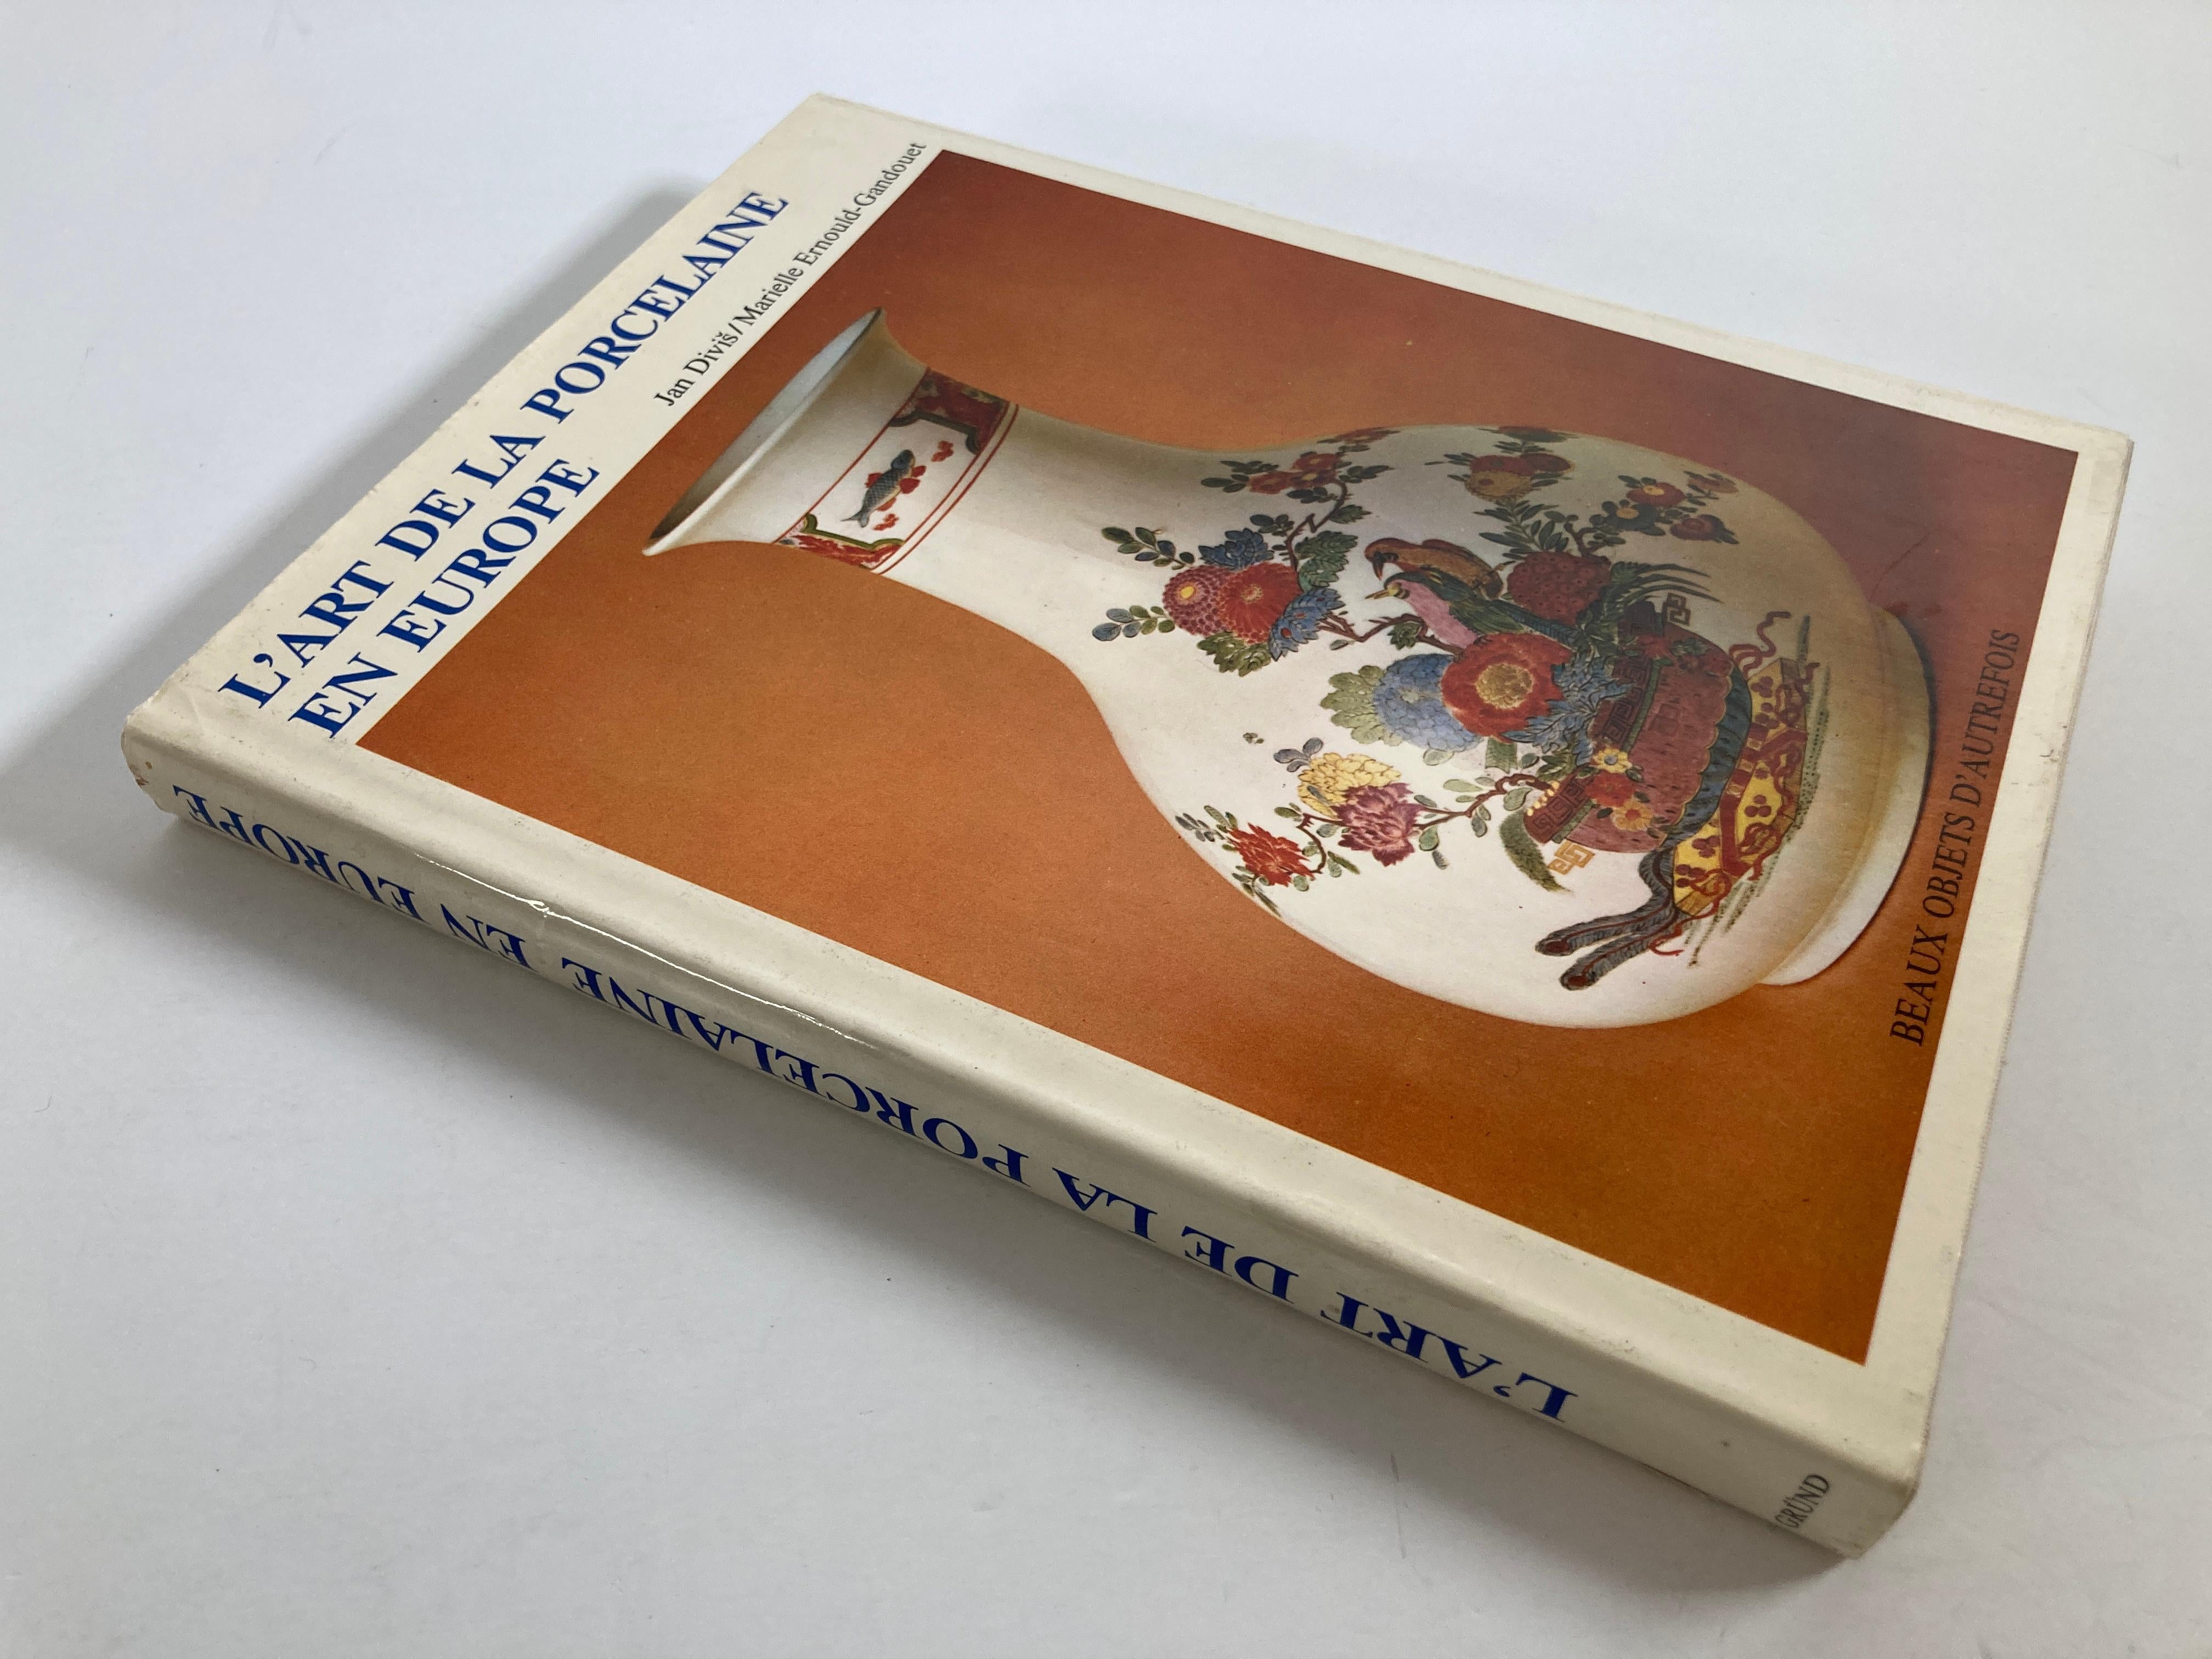 L'art de la porcelaine en europe (French) Hardcover – January 1, 1984
by Jan; and Ernould-Gandouet Divis (Author)
The Art of Porcelain in Europe, beautiful objects from the past.
Published by GRUND, 1986
Publisher: Grund (January 1, 1984)
Language: